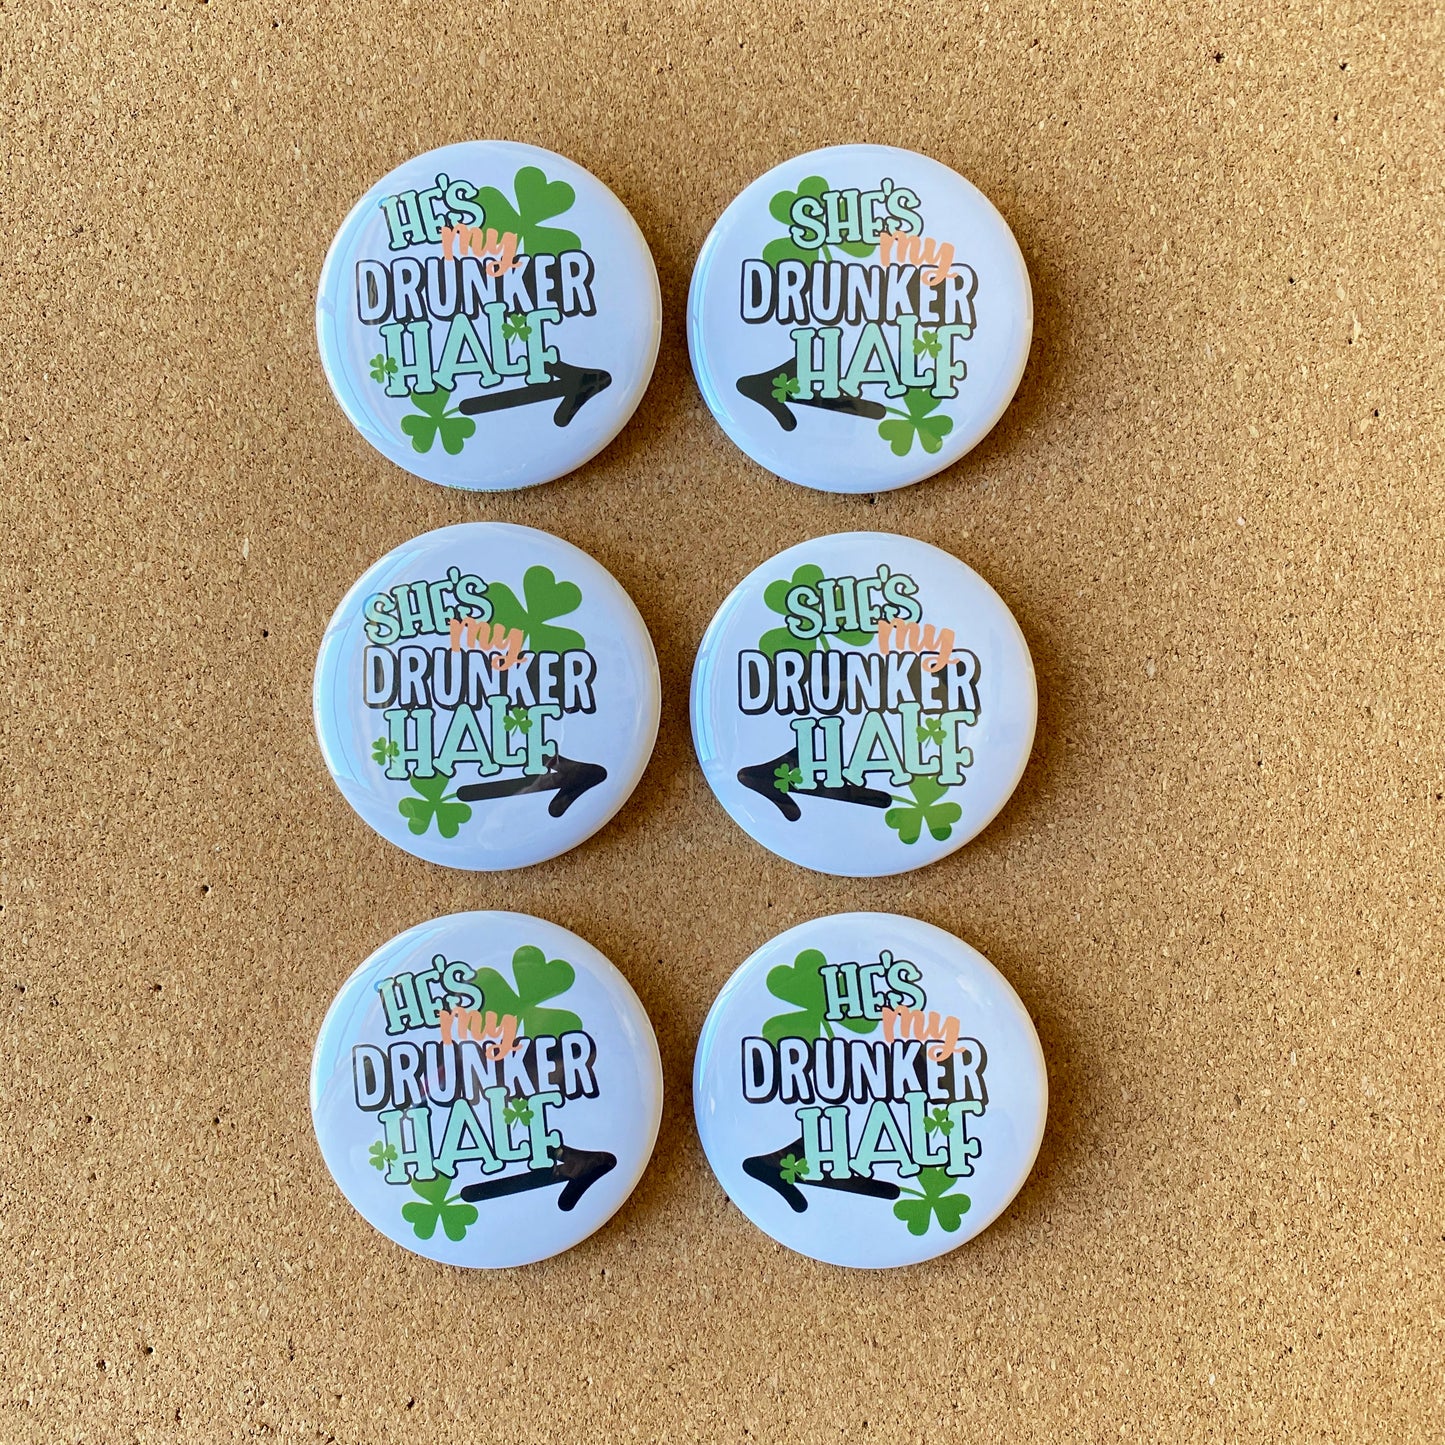 My Drunker Half - Pair of Buttons